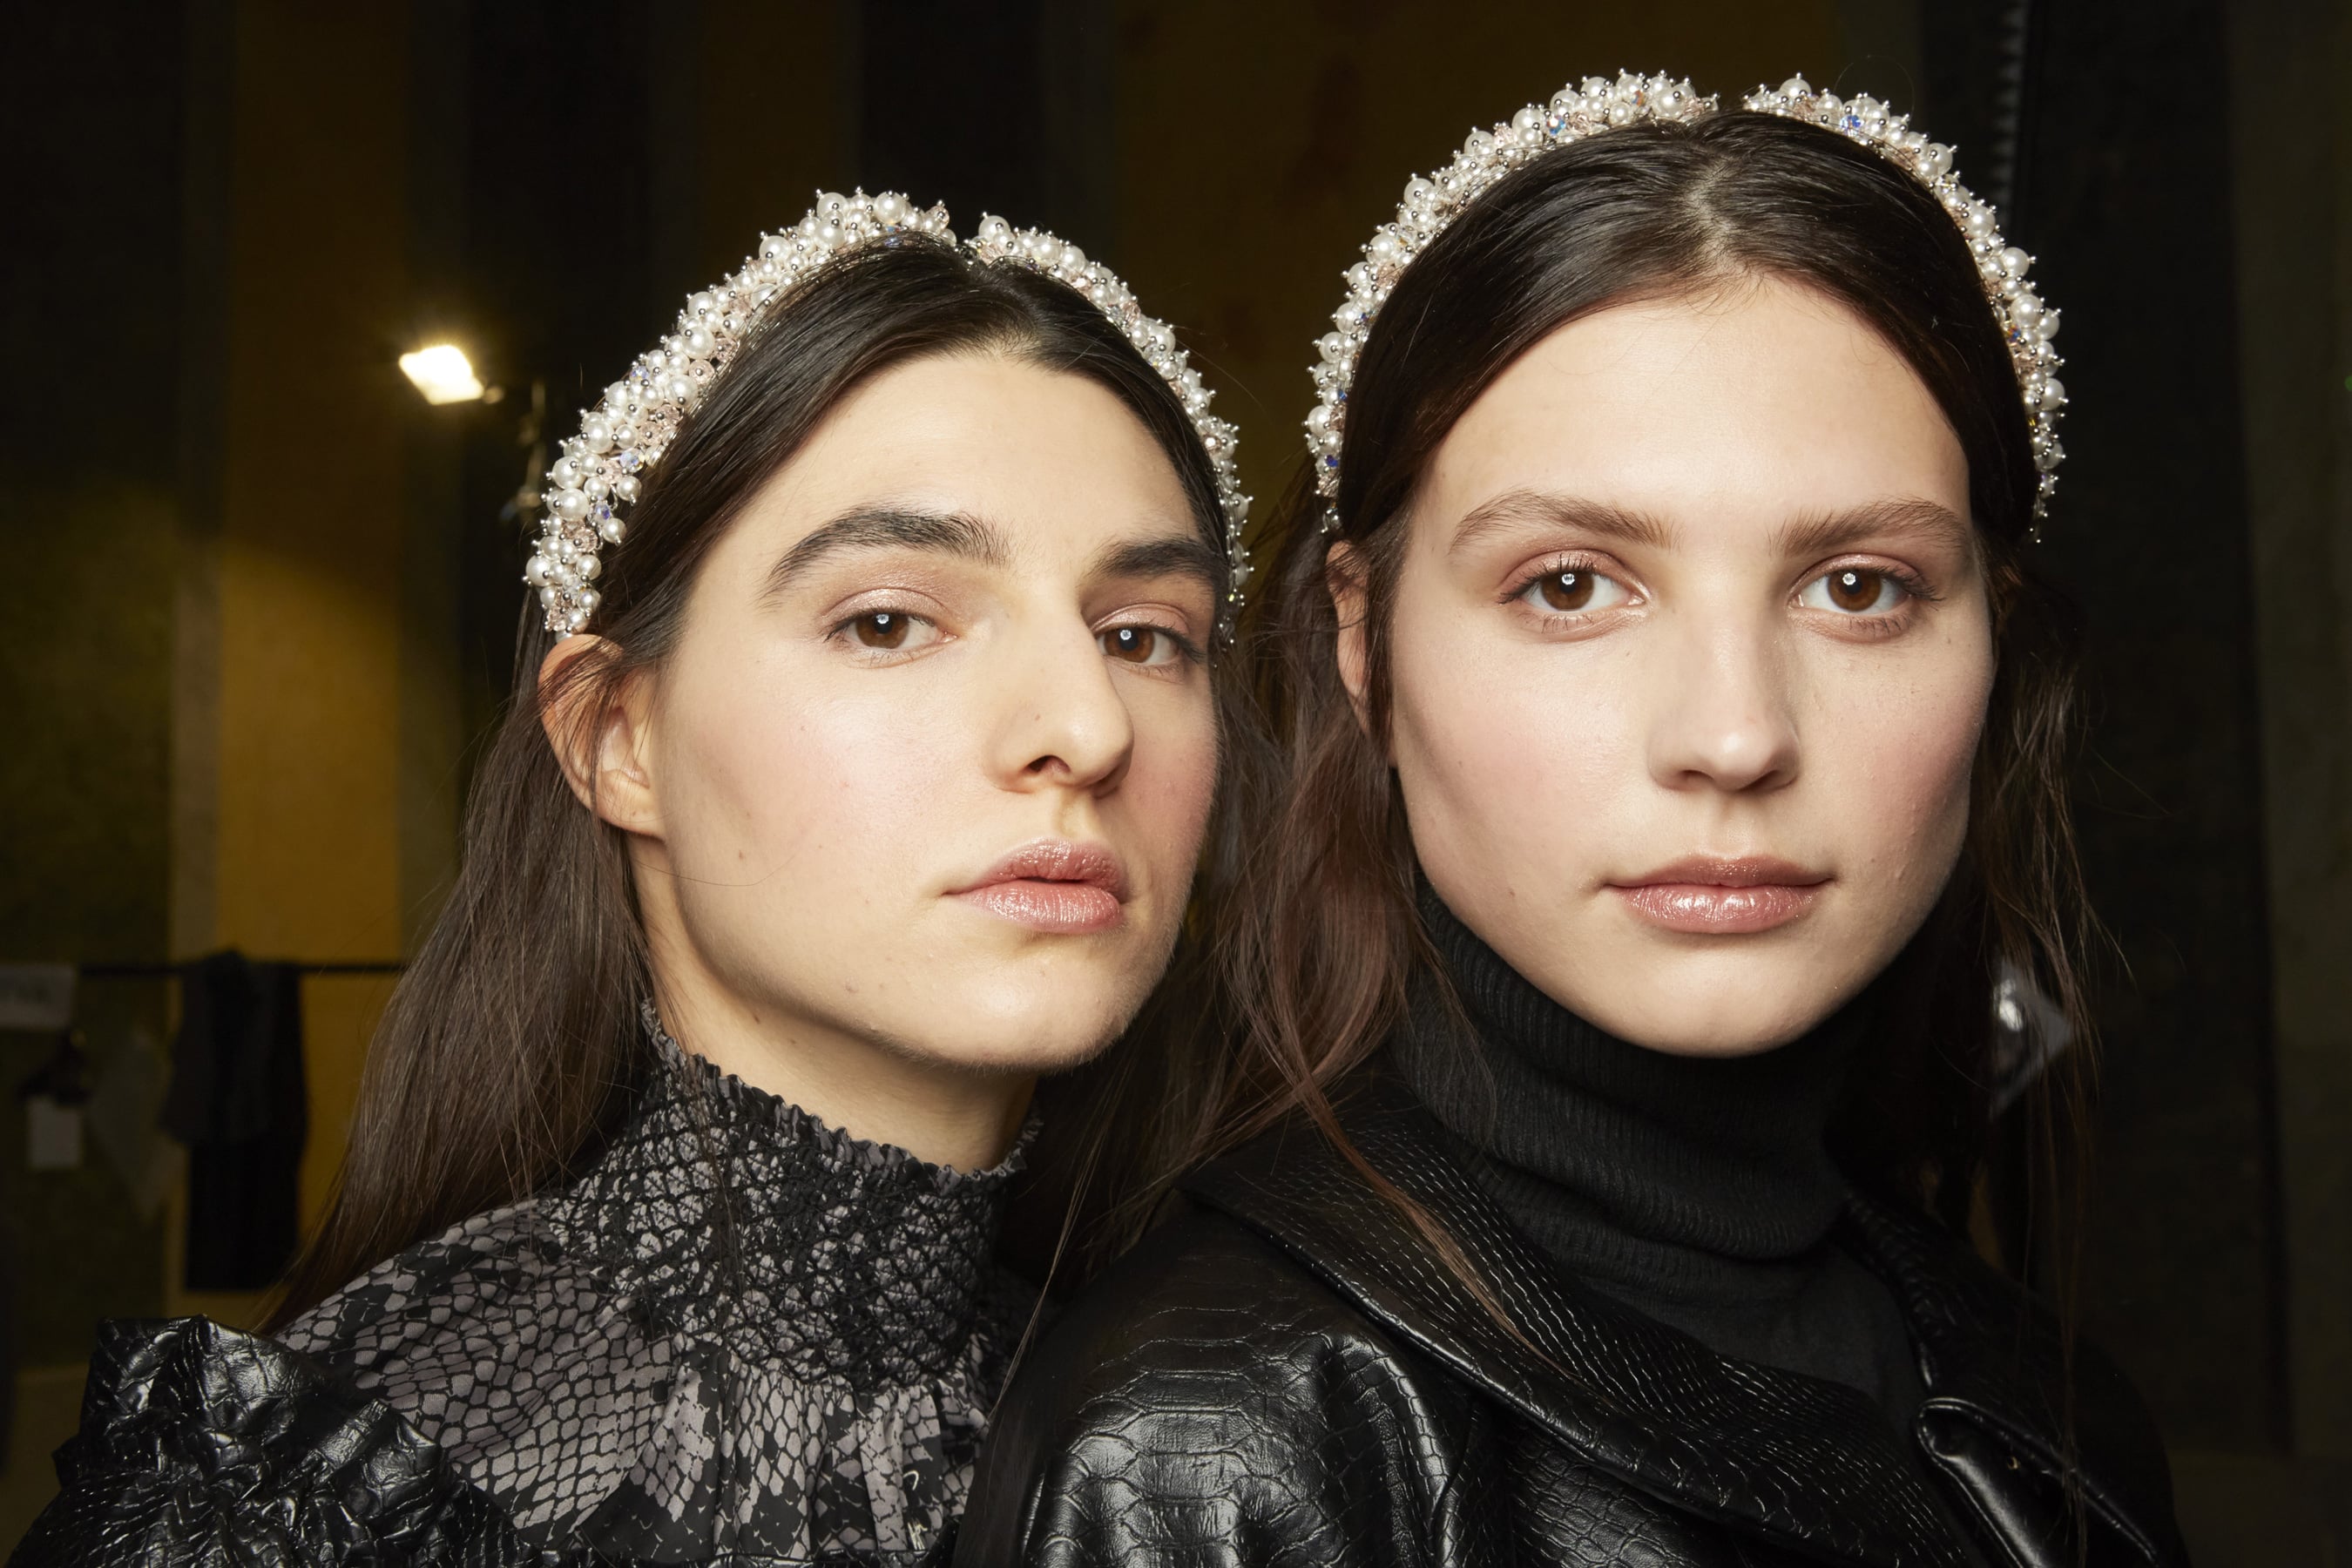 This Chanel hair clip is set to be 2019's most Instagrammed accessory, London Evening Standard